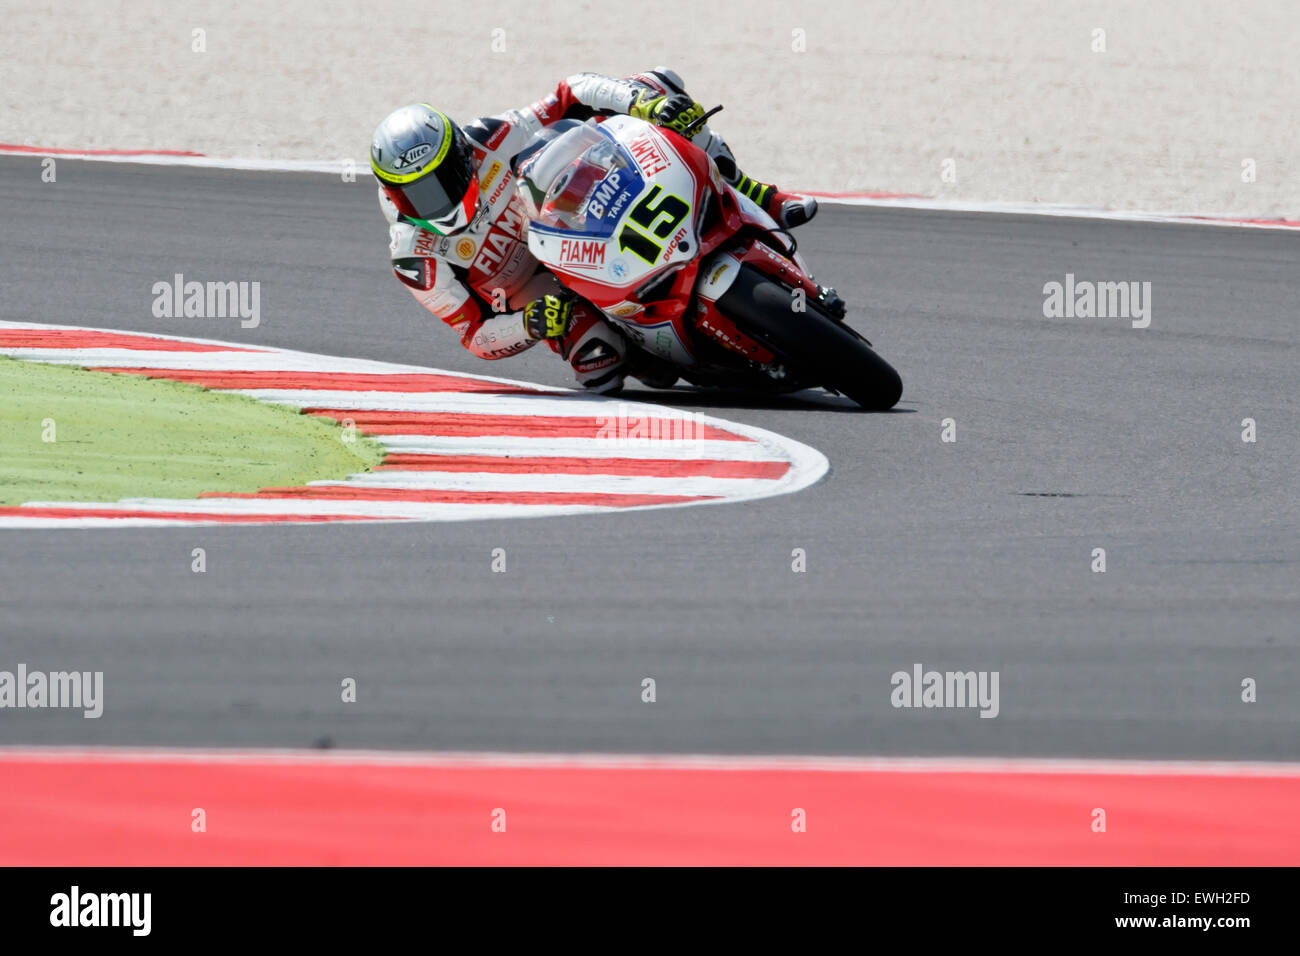 Misano Adriatico, Italy - June 20: Ducati Panigale R of Althea Racing Team, driven by BAIOCCO Matteo Stock Photo